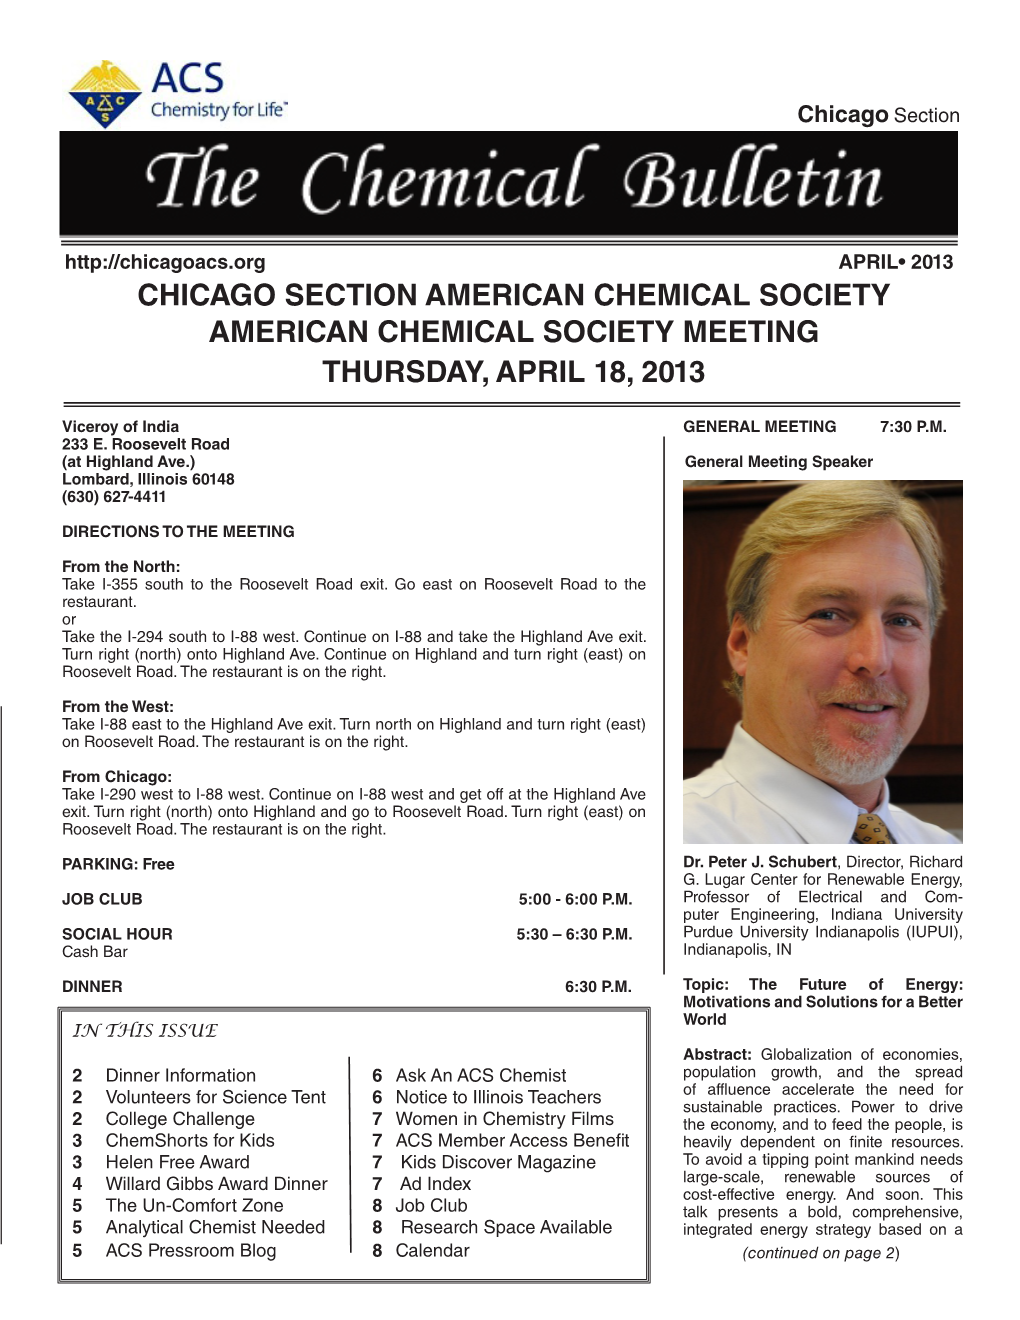 Chicago Section American Chemical Society American Chemical Society Meeting Thursday, April 18, 2013